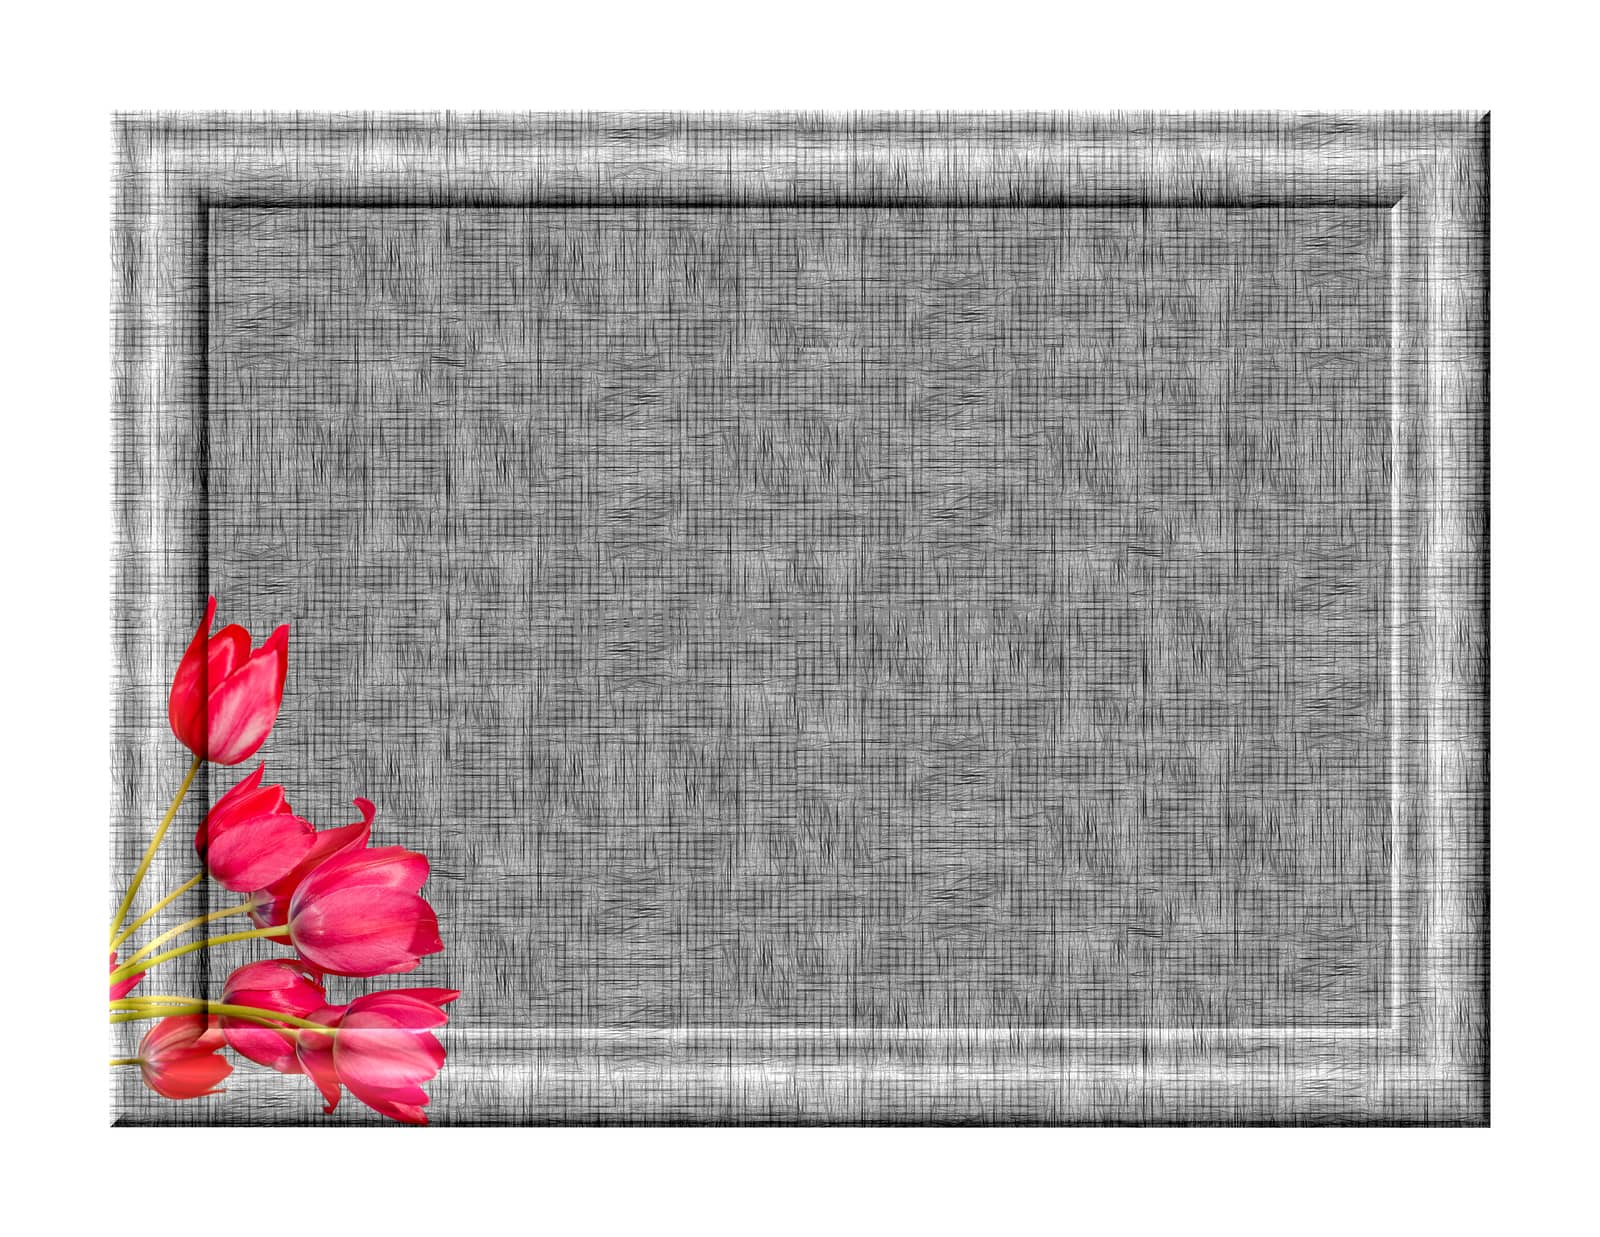 Frame rectangular relief with empty black and white fine textured gray tones with the image of pink tulips in the lower left corner of the frame isolated on white background